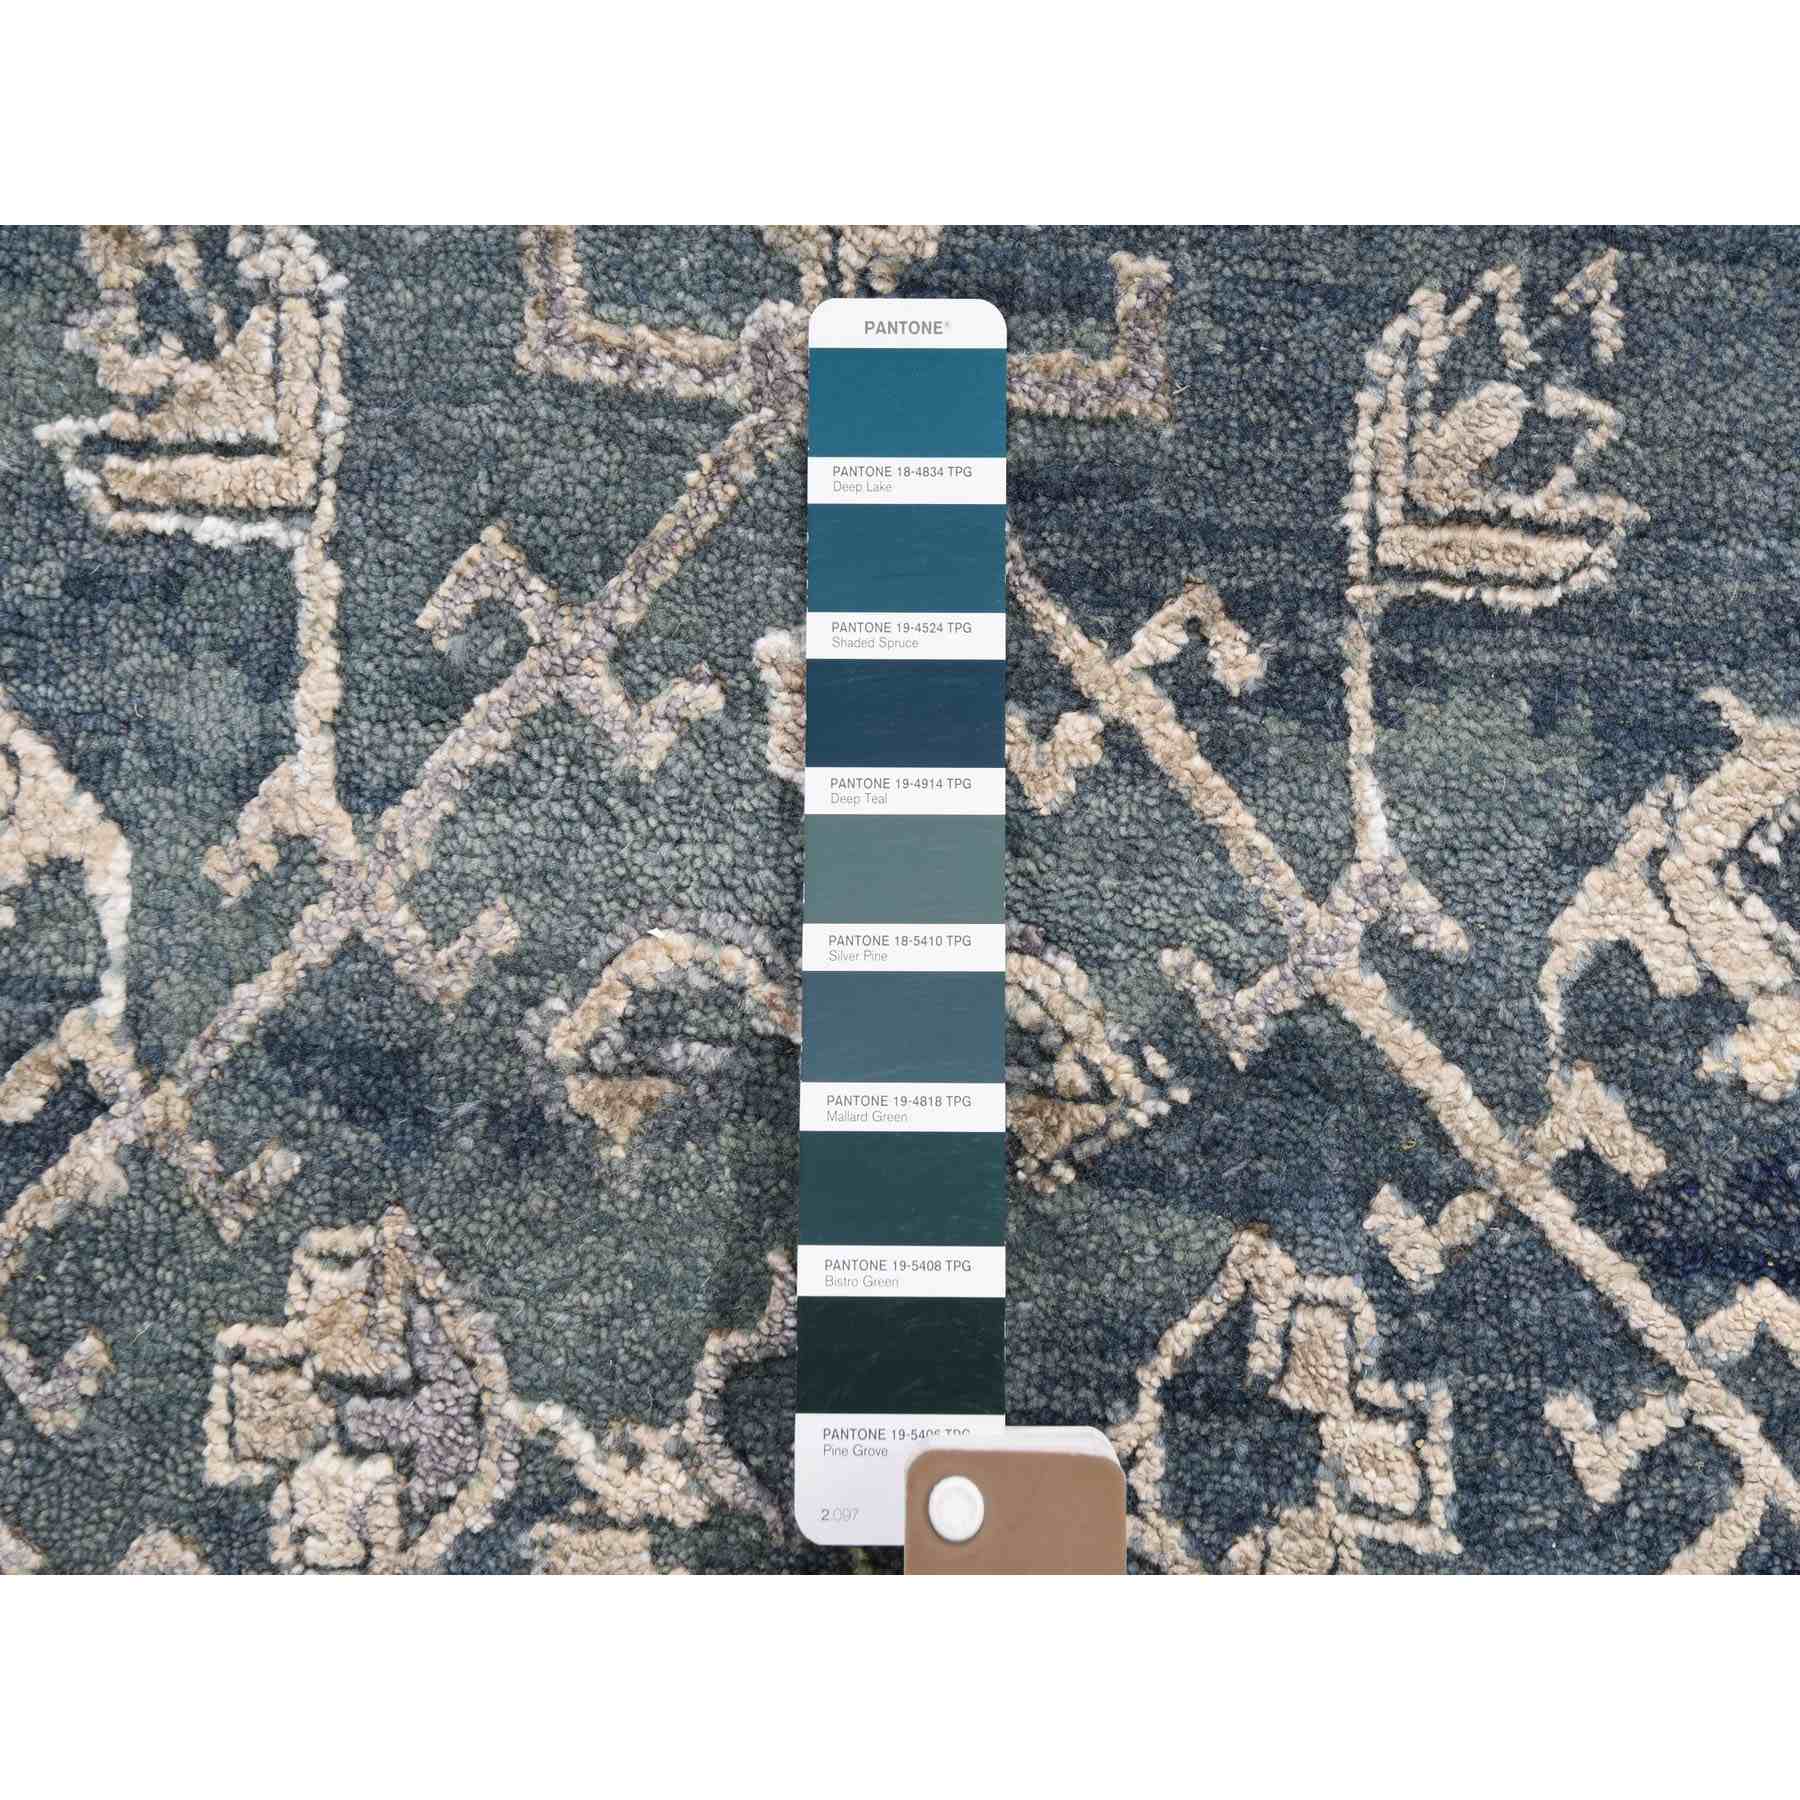 Transitional-Hand-Knotted-Rug-241255